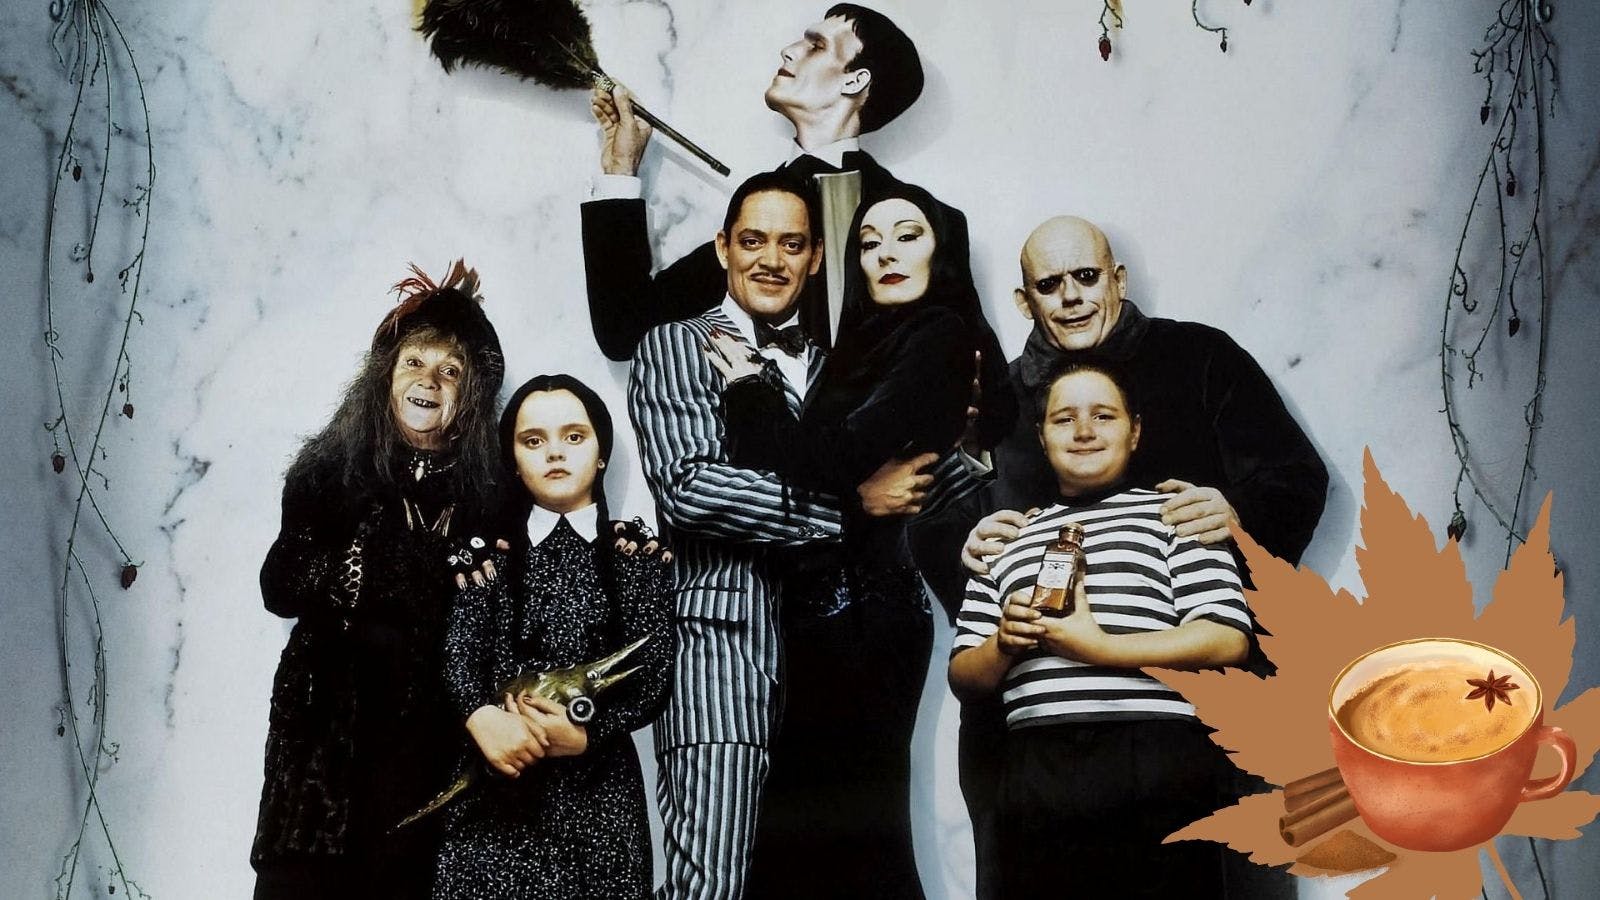 The classic Addams family paired with chai tea